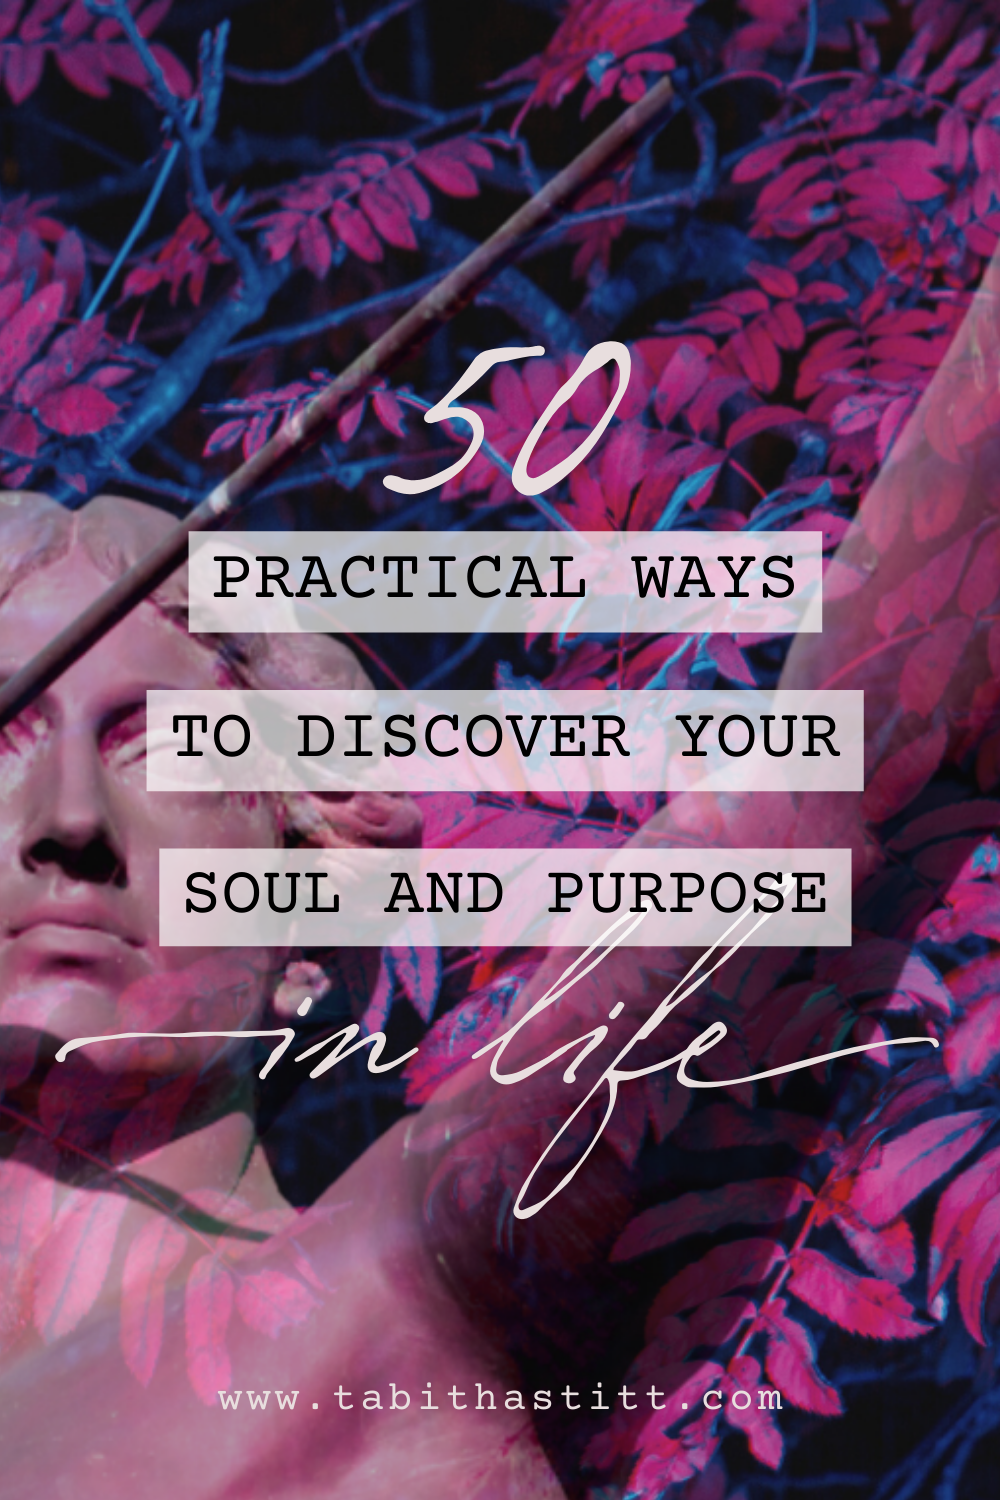 50 Practical Ways to Discover Your Soul and Purpose in Life written and channeled by Tabitha Stitt The Self Help Psychic and Spiritual Teacher showing a bow and arrow to symbolize focus and determination